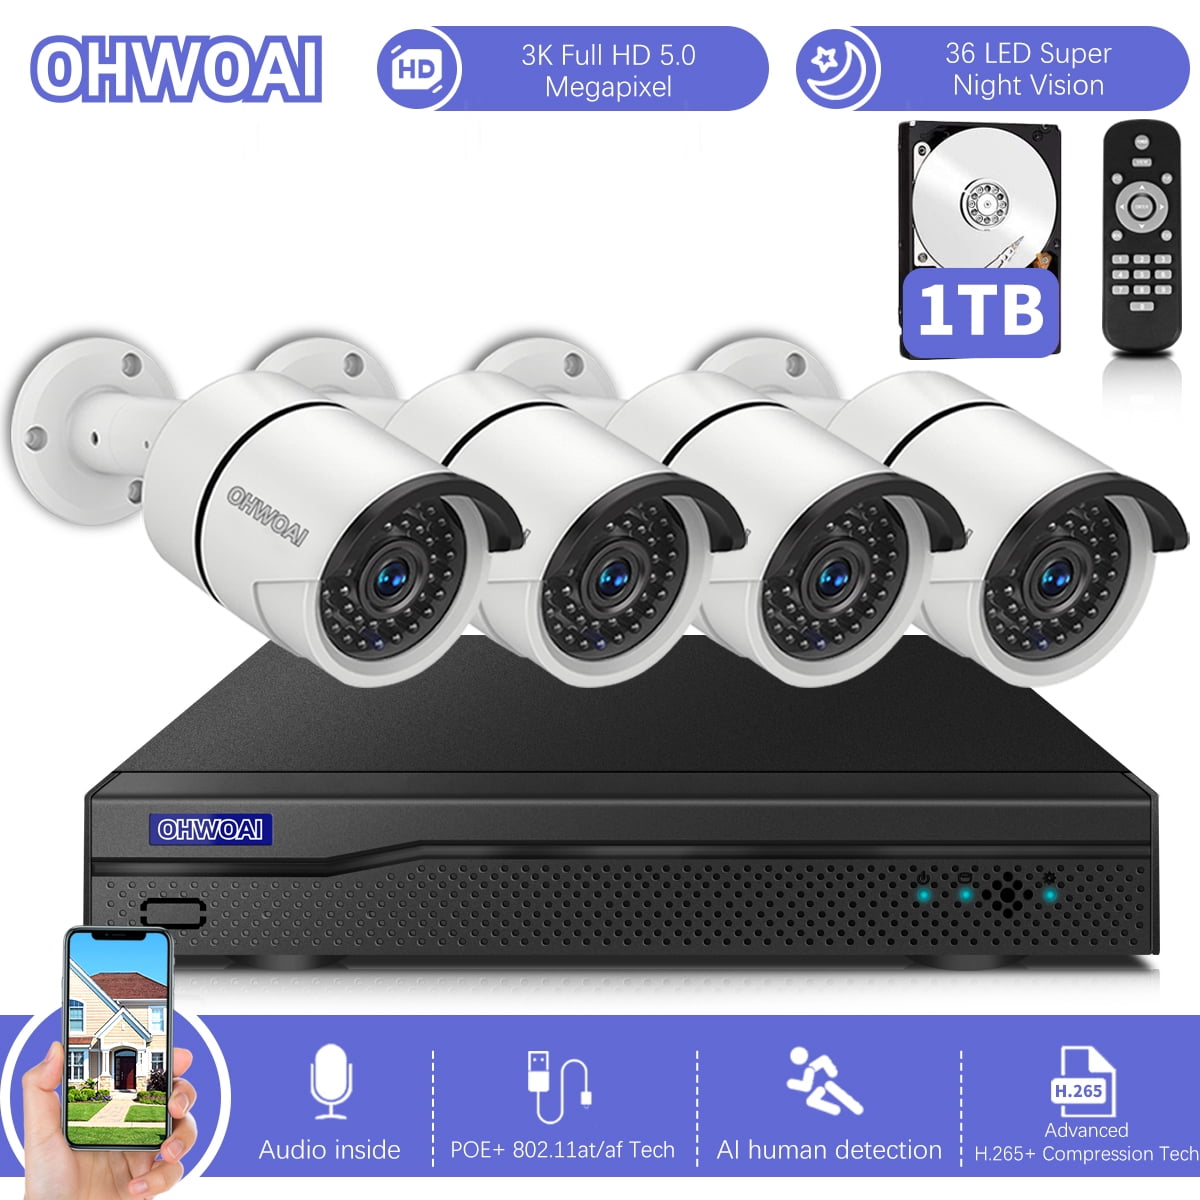 4K 8 Channel Poe NVR Security Camera System,5MP Poe Camera x 4,Home Video Surveillance System Poe with 1TB HDD,Wired Outdoor Poe Security Camera with Audio. OHWOAI POE Camera System 